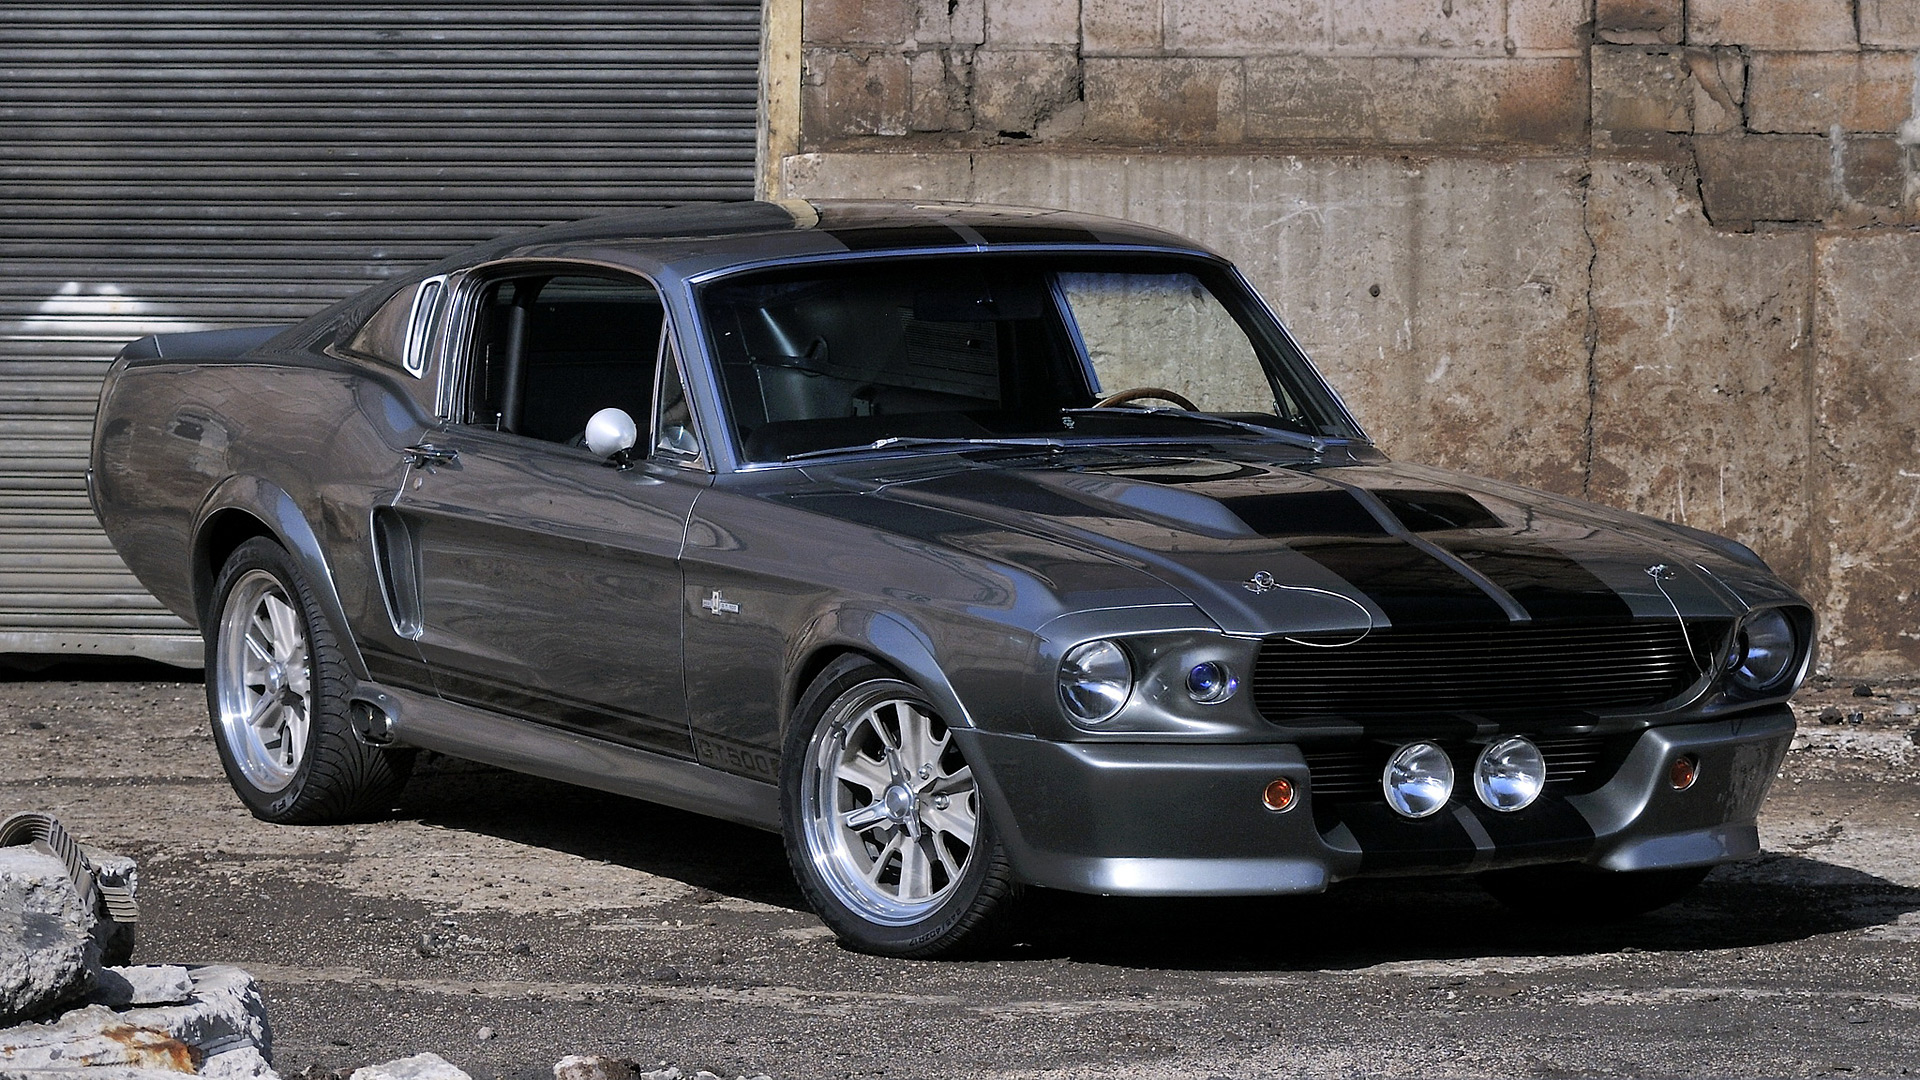 Ford Mustang Shelby Gt500 2000 - HD Wallpaper 